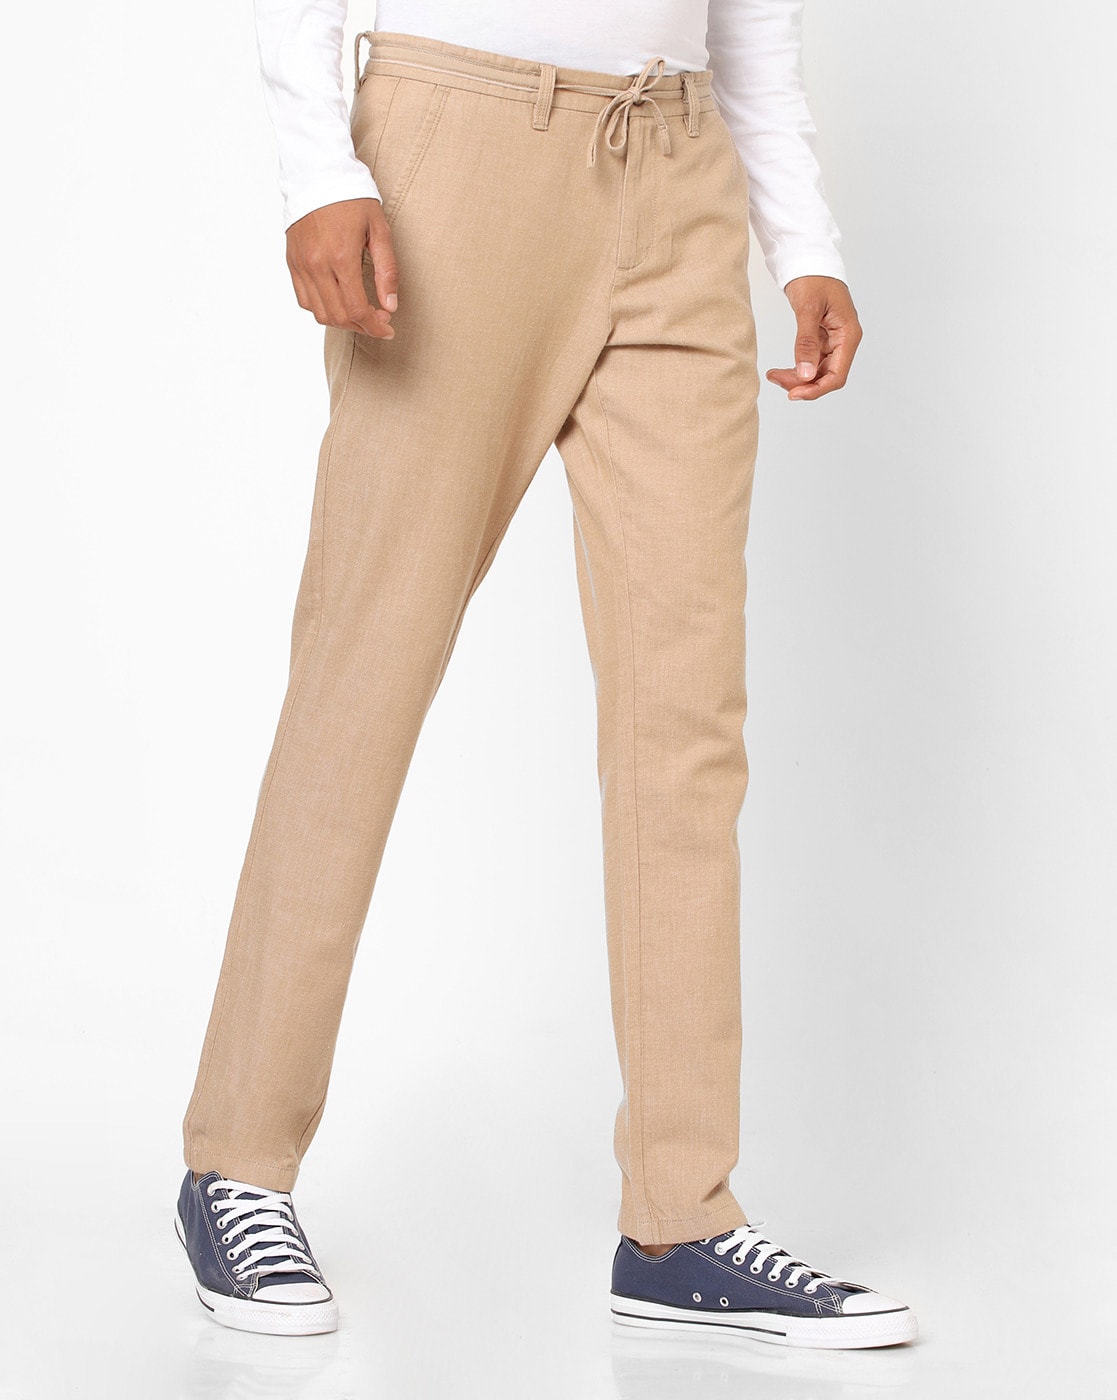 Mens Pants Tailored Front EasyWear  Executive Apparel